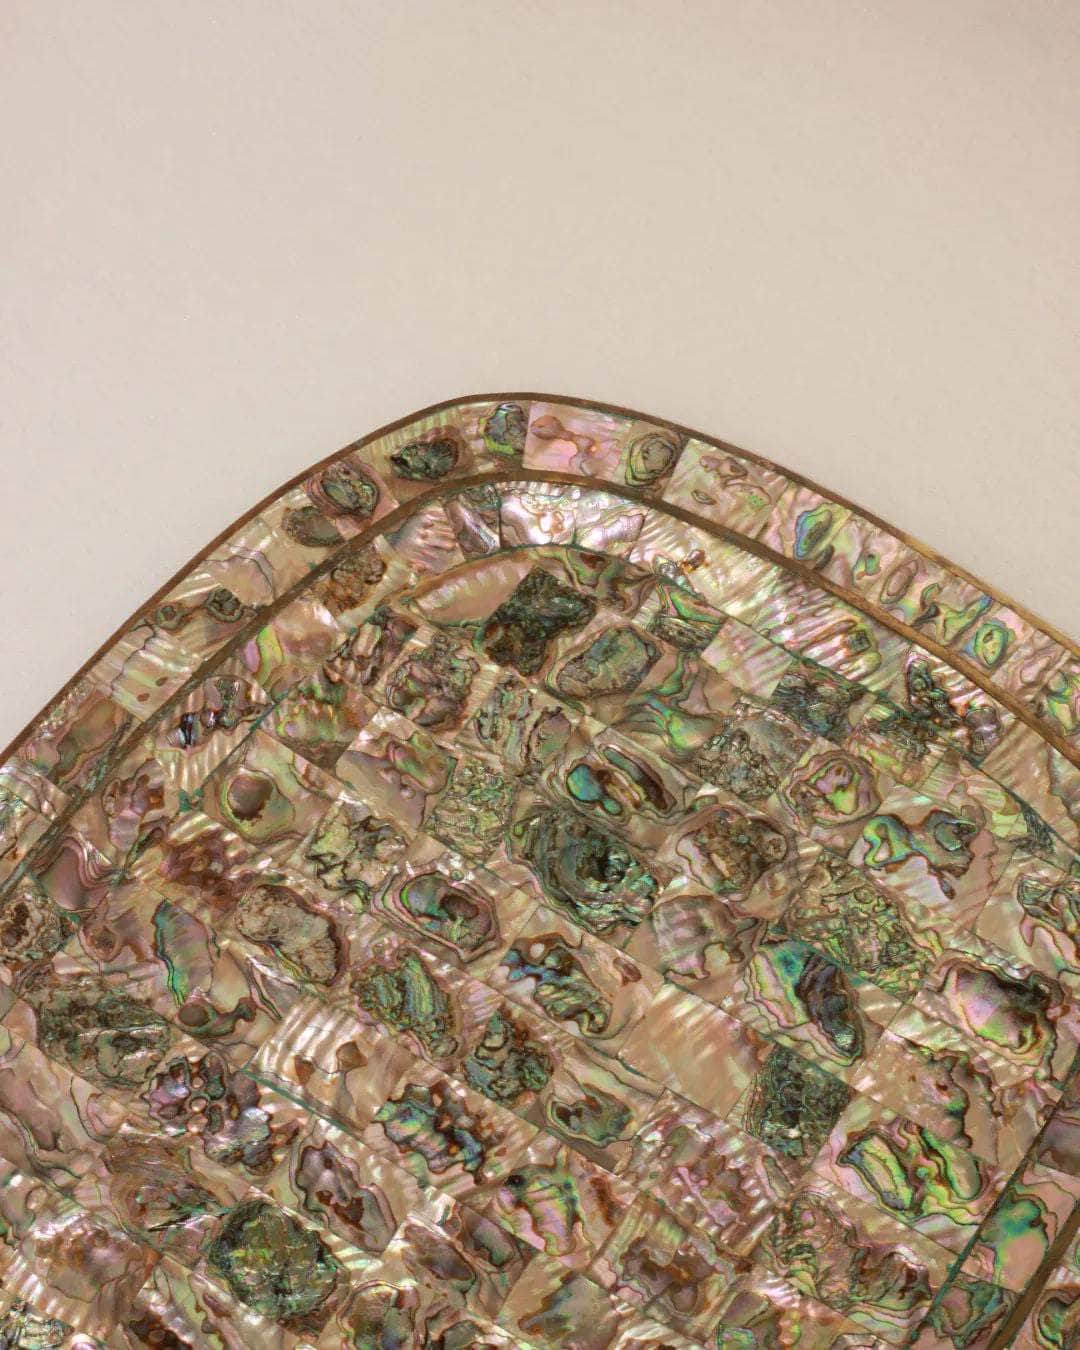 Vintage Mexican Abalone Tray